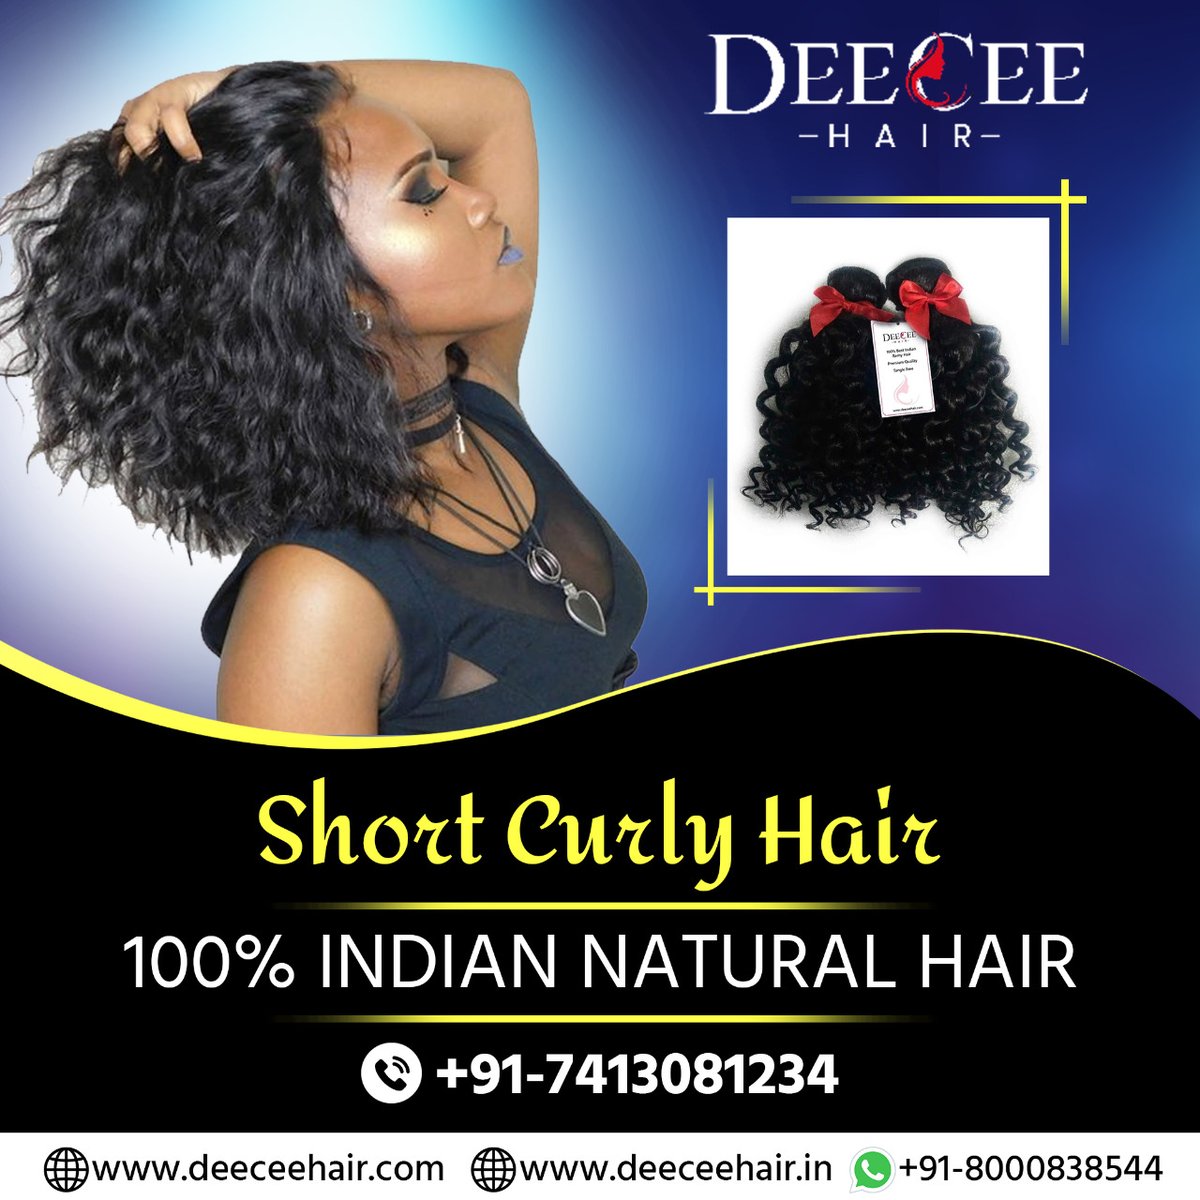 Get the fabulous Natural Black Short Curly Hair for women that are made from 100% natural human hair.
To know more, visit our website.
Contact us for more details about Lace wigs:

Mail: info@deeceehair.com,
WhatsApp: +91-8000838544
#humanhairweave #humanhairwigs #indianhairstyle